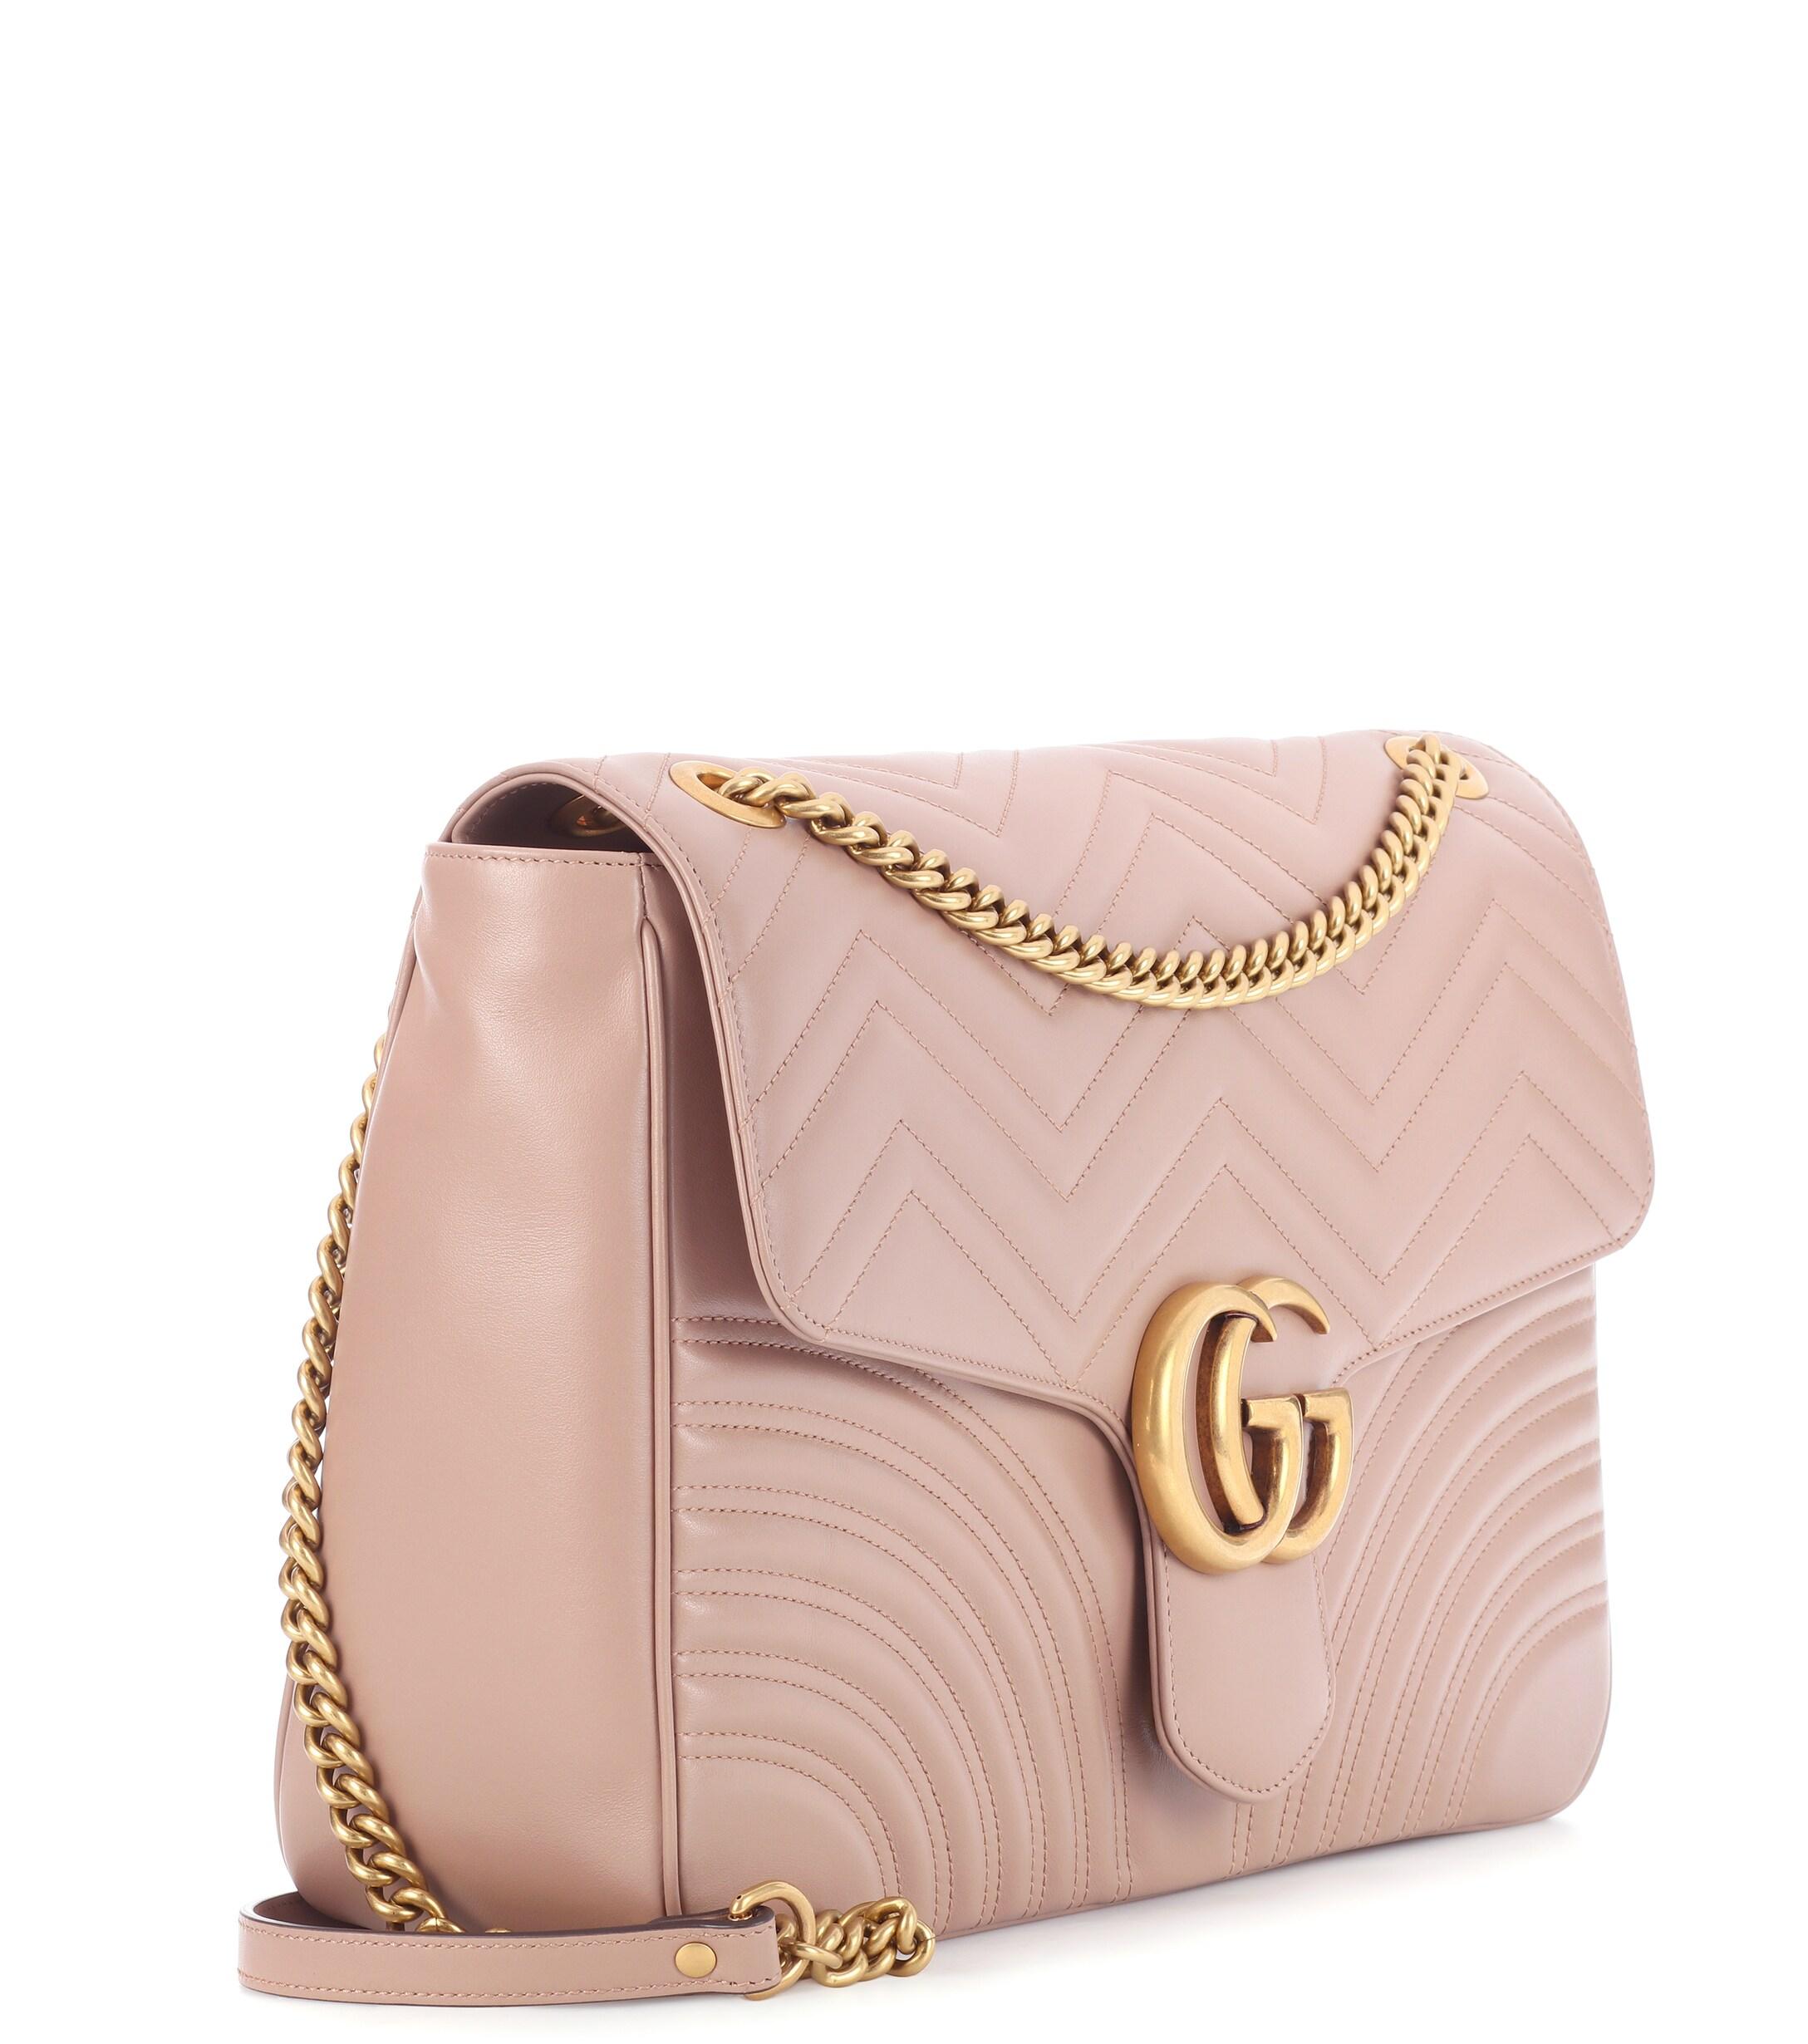 Gucci GG Marmont Large Shoulder Bag in Pink | Lyst